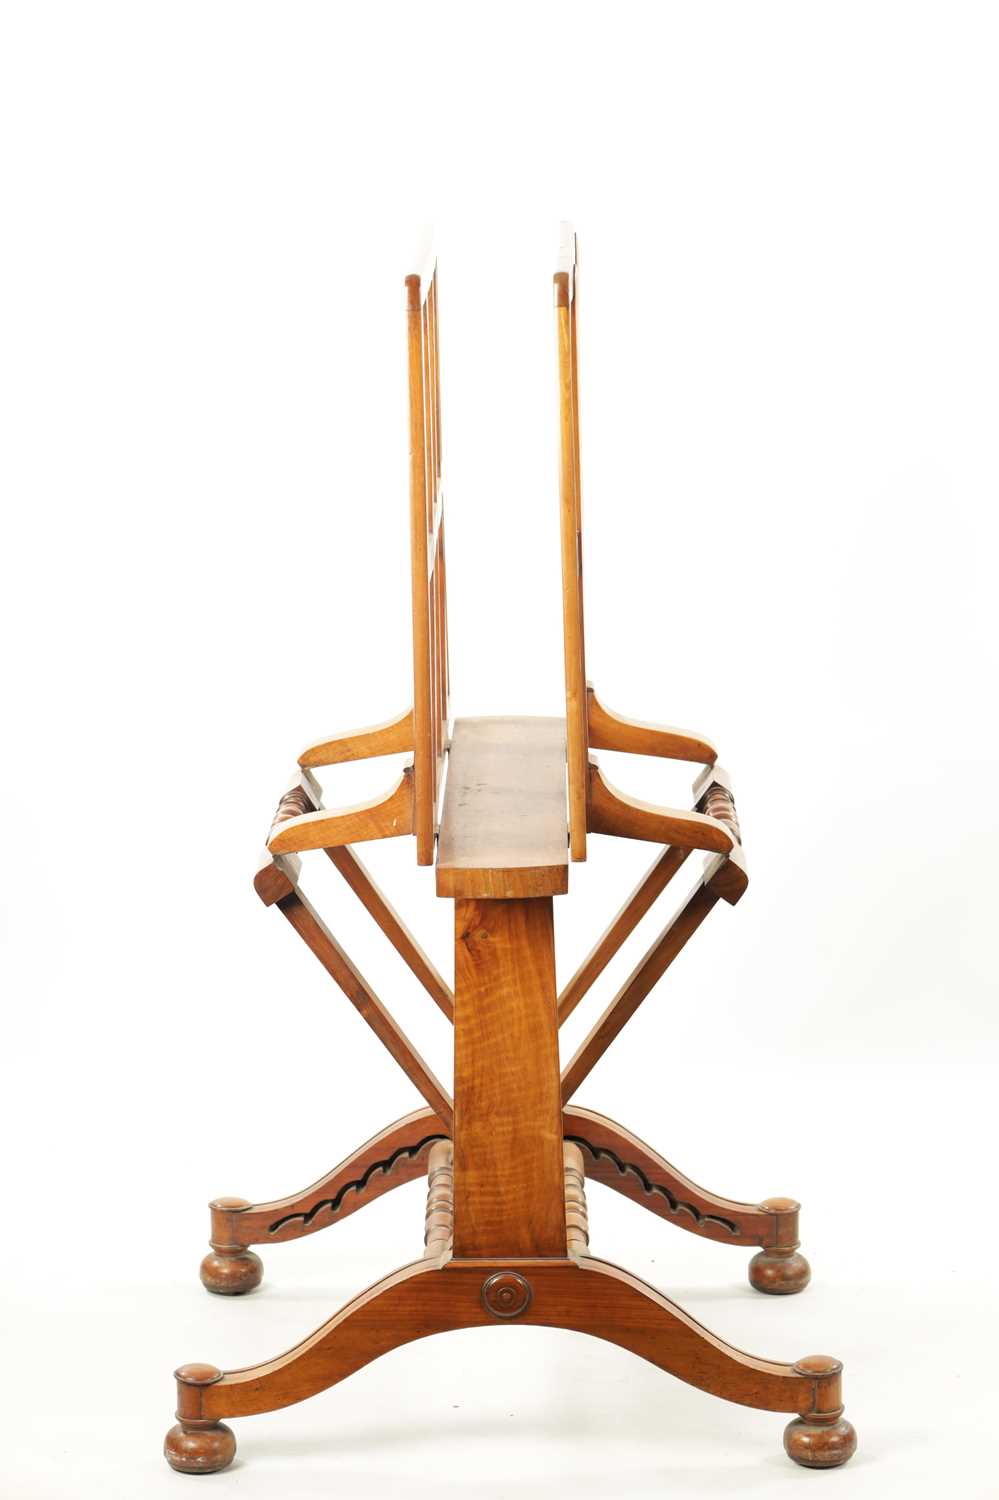 A WILLIAM IV FIGURED WALNUT ADJUSTABLE FOLIO STAND IN THE MANNER OF GILLOWS - Image 9 of 11